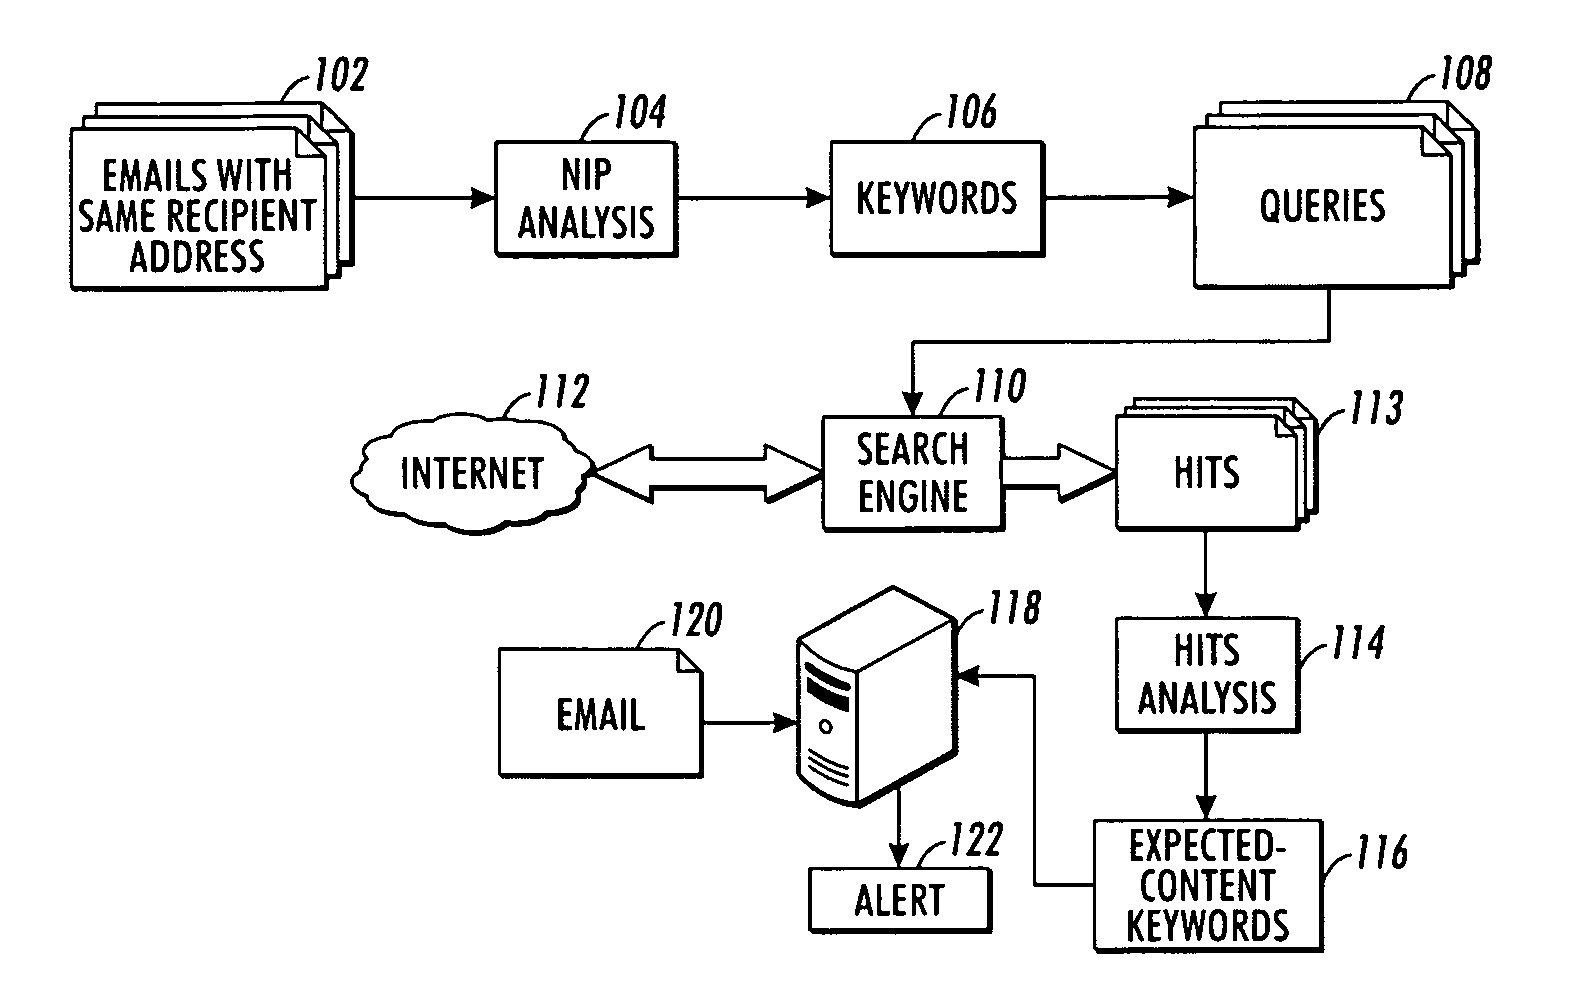 Outbound content filtering via automated inference detection